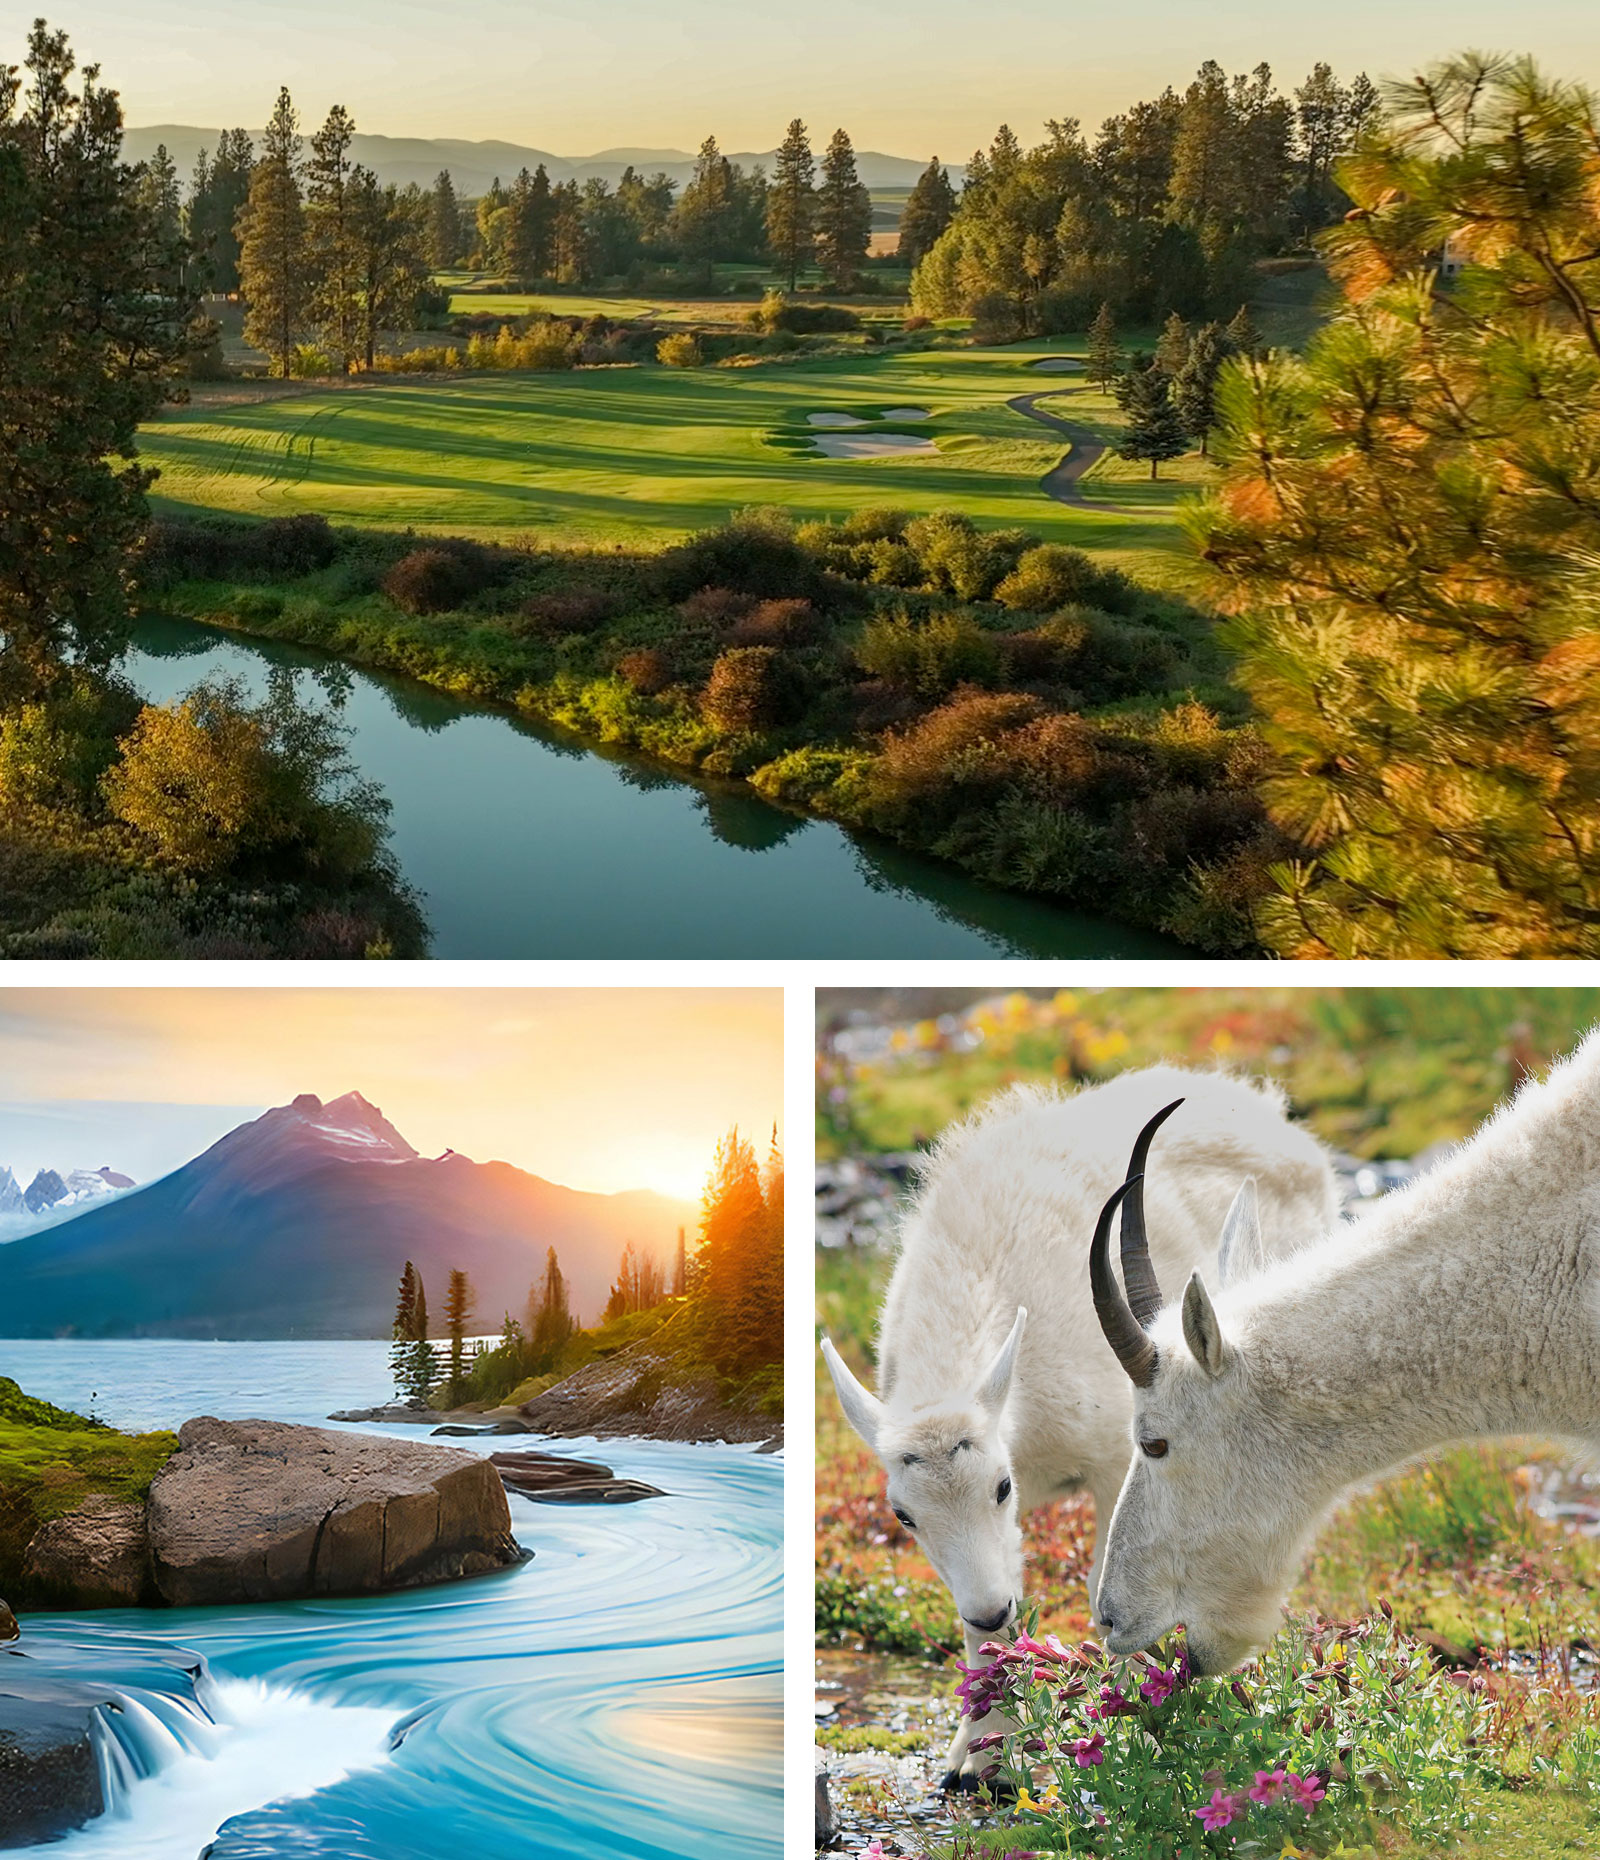 olf and Glory a Great Outdoor Luxury Adventure in Montana